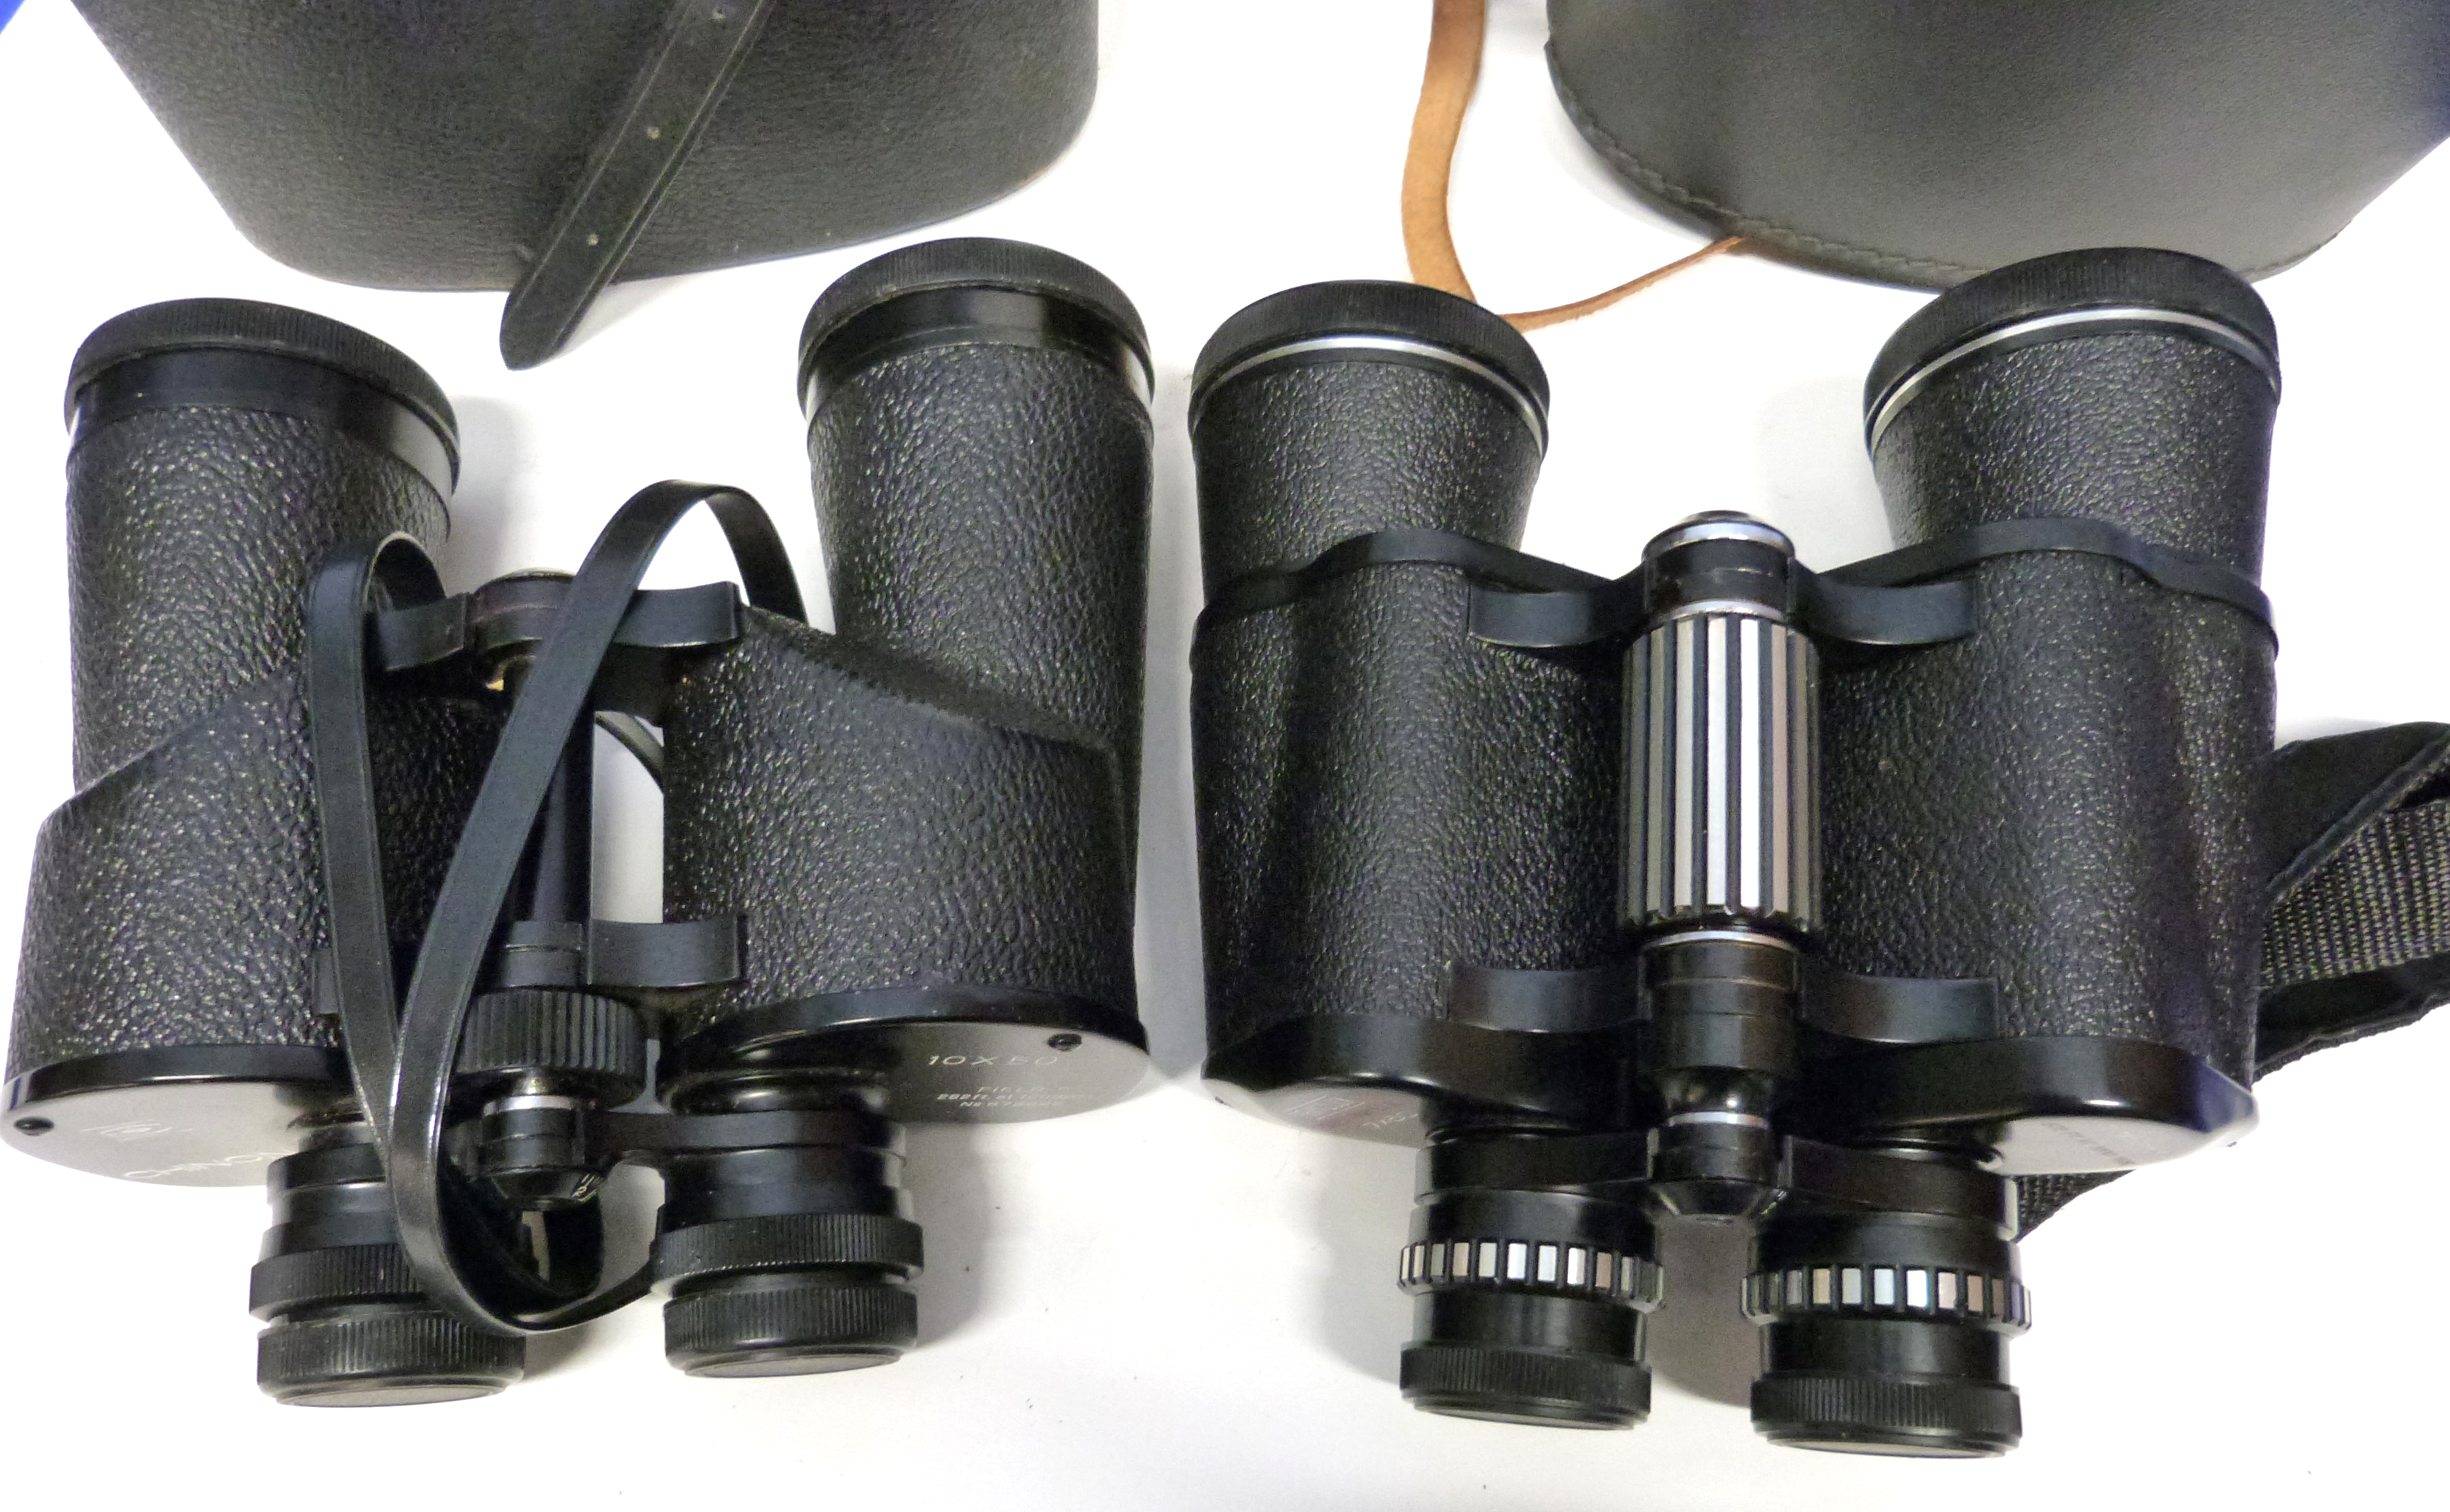 Two binoculars in cases, one manufactured by Chinon 10x50, the other by Prinzlux Spacemaster 7x50 ( - Bild 2 aus 3